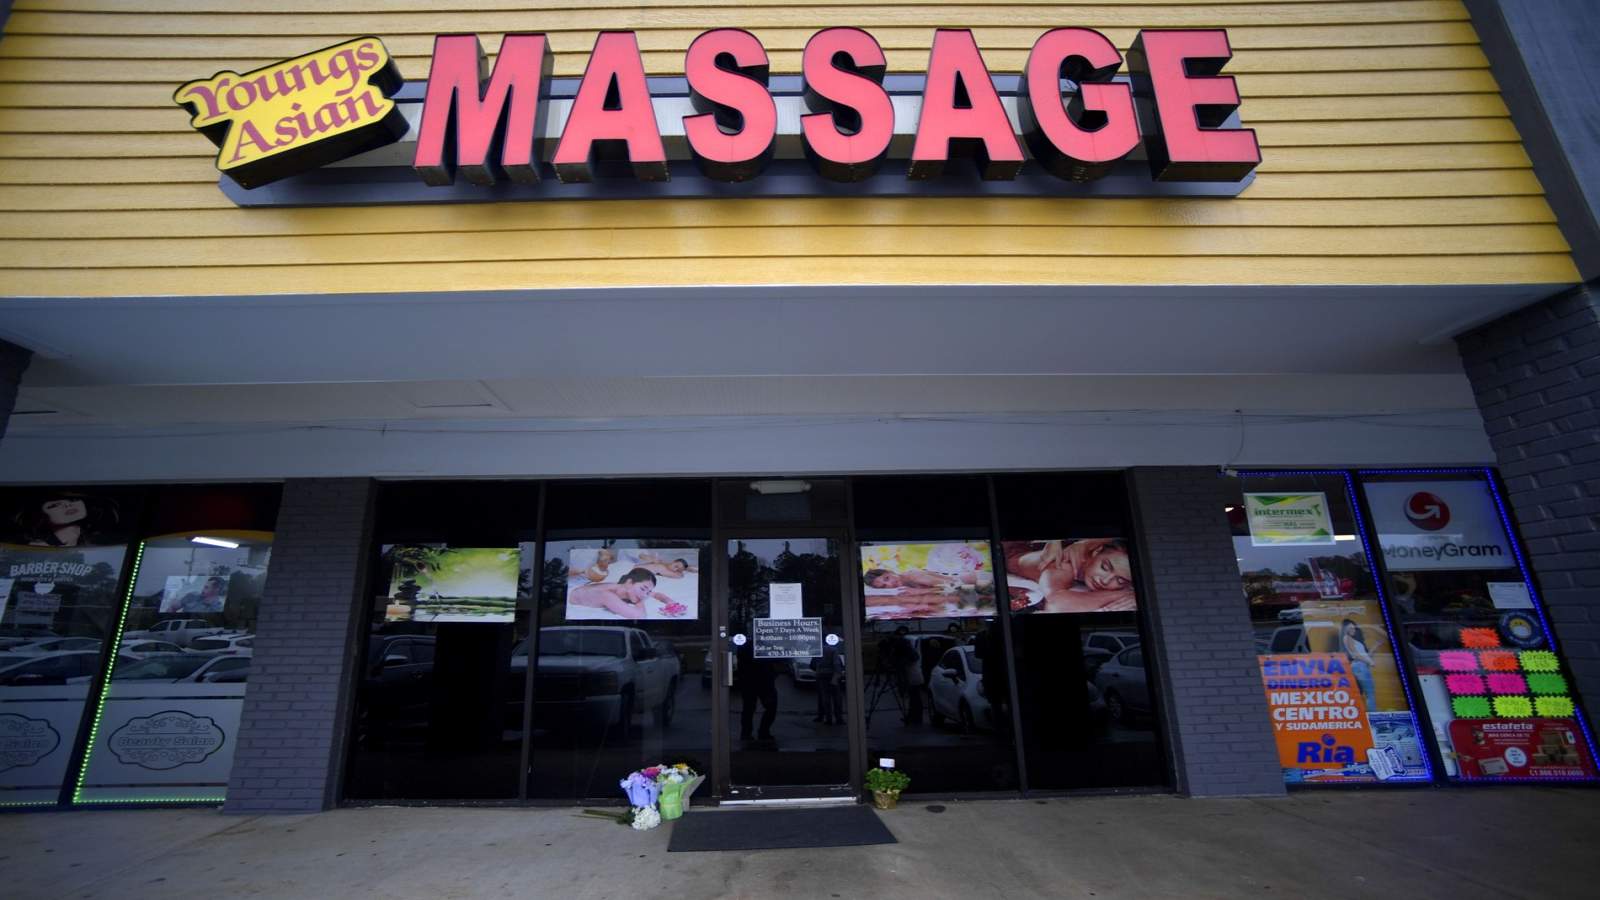 Man charged with killing 8 people at Georgia massage parlors